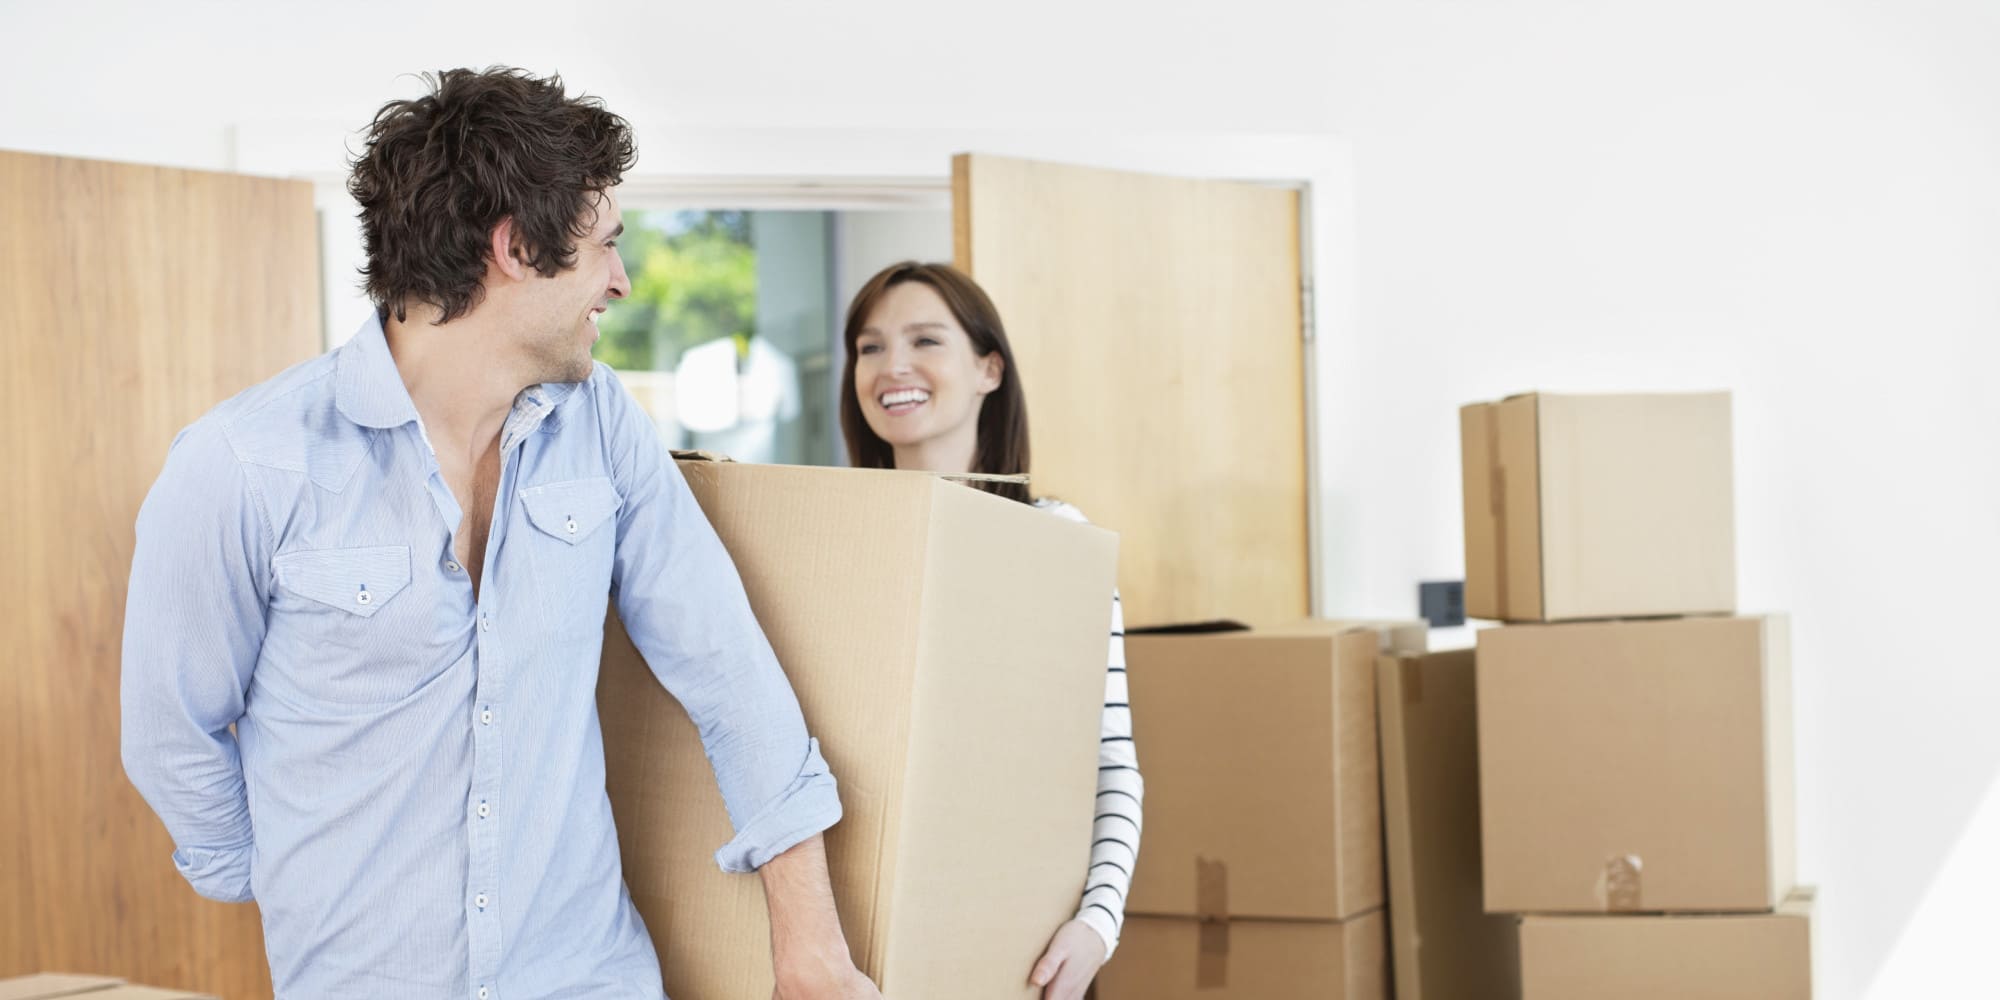 Best Movers & Packers in Jumeirah Dubai